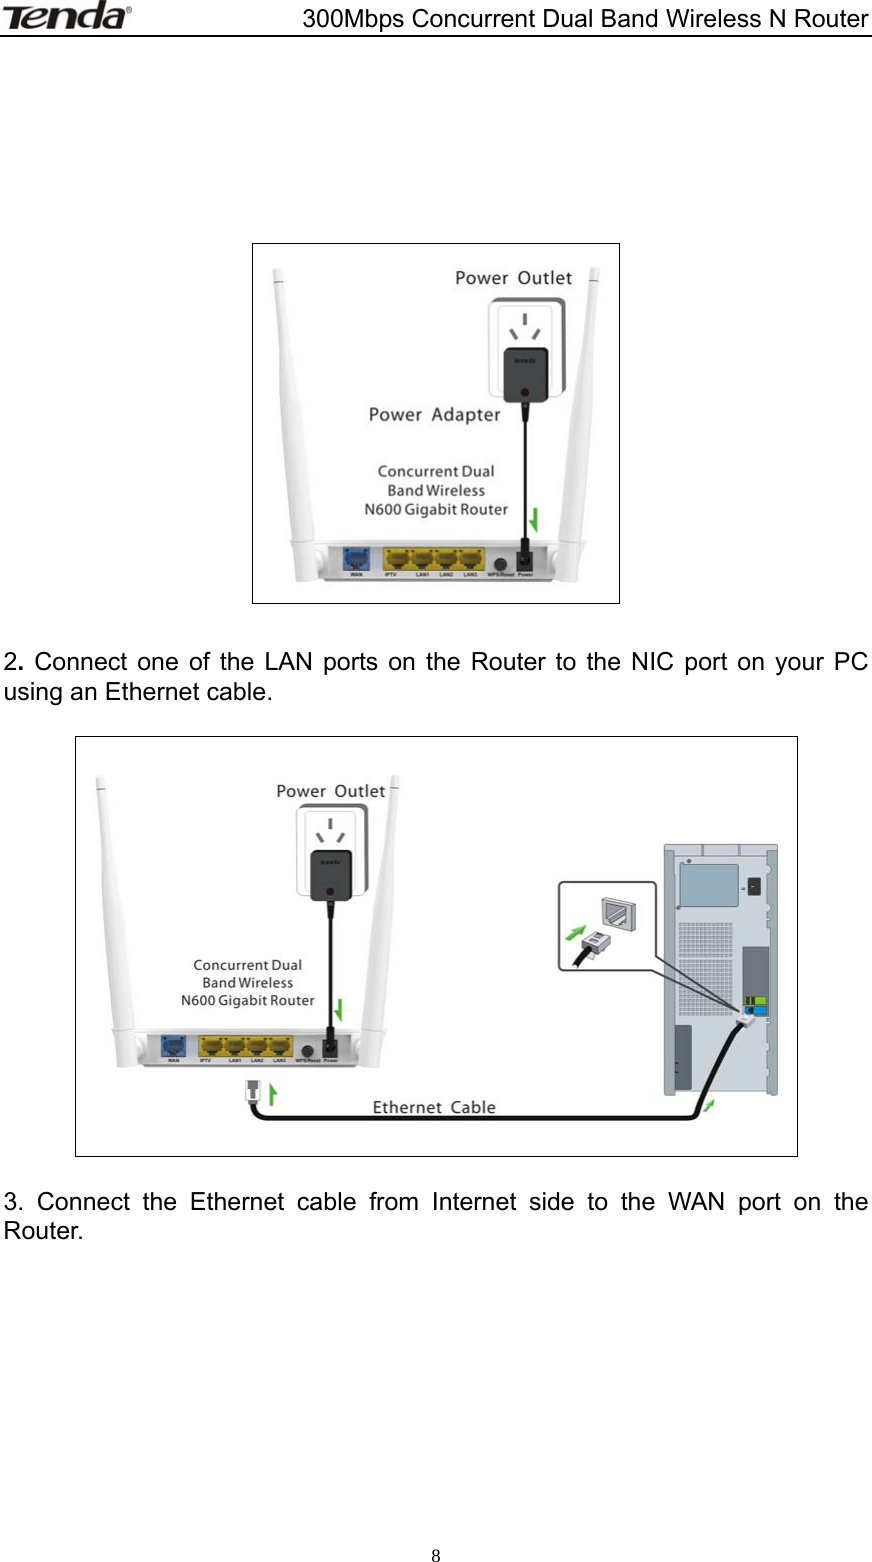                       300Mbps Concurrent Dual Band Wireless N Router  8       2. Connect one of the LAN ports on the Router to the NIC port on your PC using an Ethernet cable.    3. Connect the Ethernet cable from Internet side to the WAN port on the Router.  